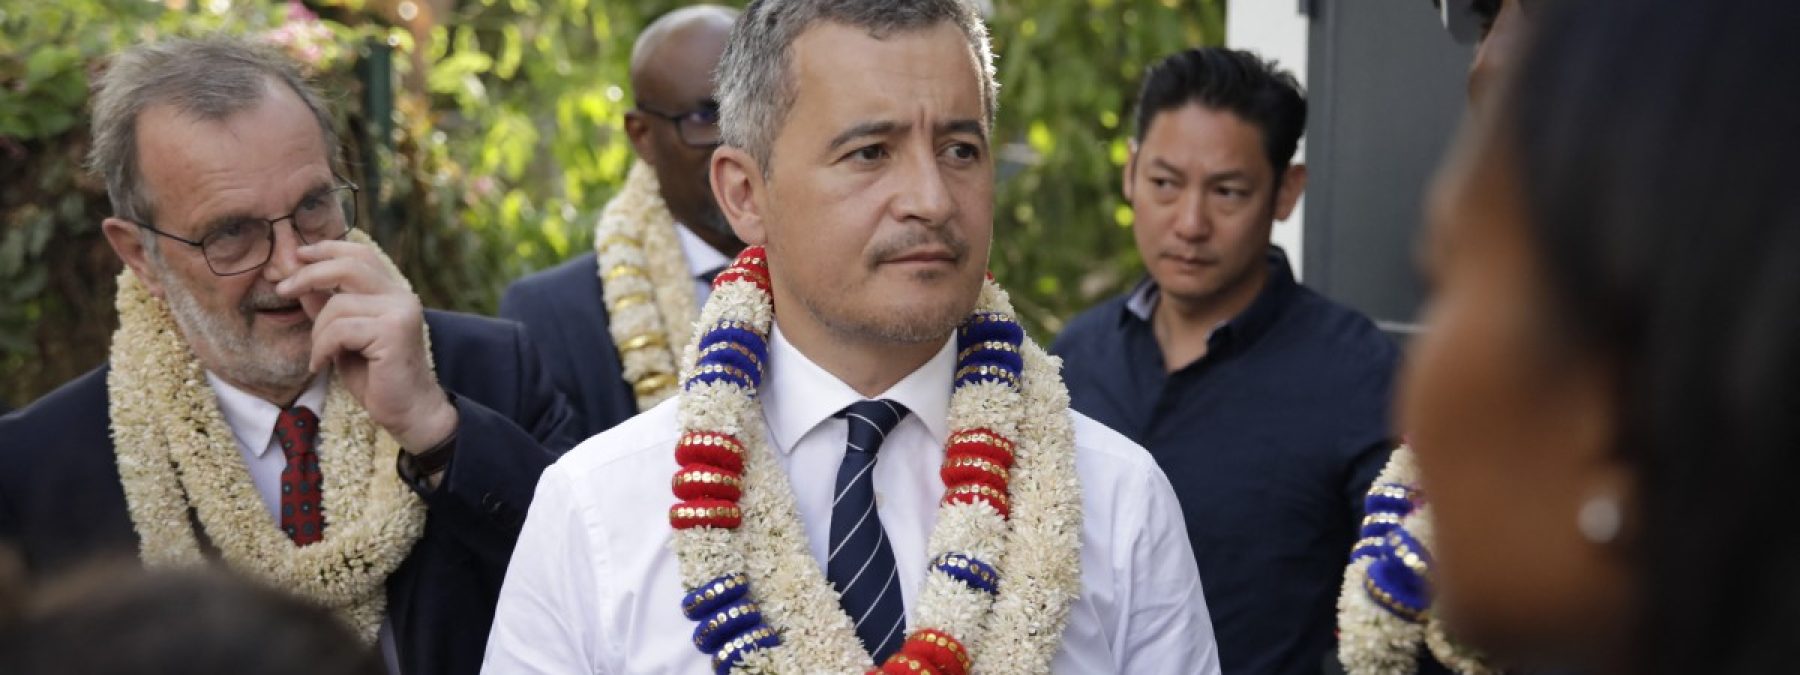 (FILES) French Interior and Overseas Minister Gerald Darmanin (C) attends a visit to a surveillance centre in Mamoudzou, on the French Indian Ocean island of Mayotte, on June 25, 2023. - Gerald Darmanin announced on February 11, 2024 a constitutional amendment to eliminate "Jus Soli", the acquisition of citizenship by birth within a territory, on the Indian Ocean island of Mayotte, which faces an ongoing migration crisis. (Photo by Chafion MADI / AFP)